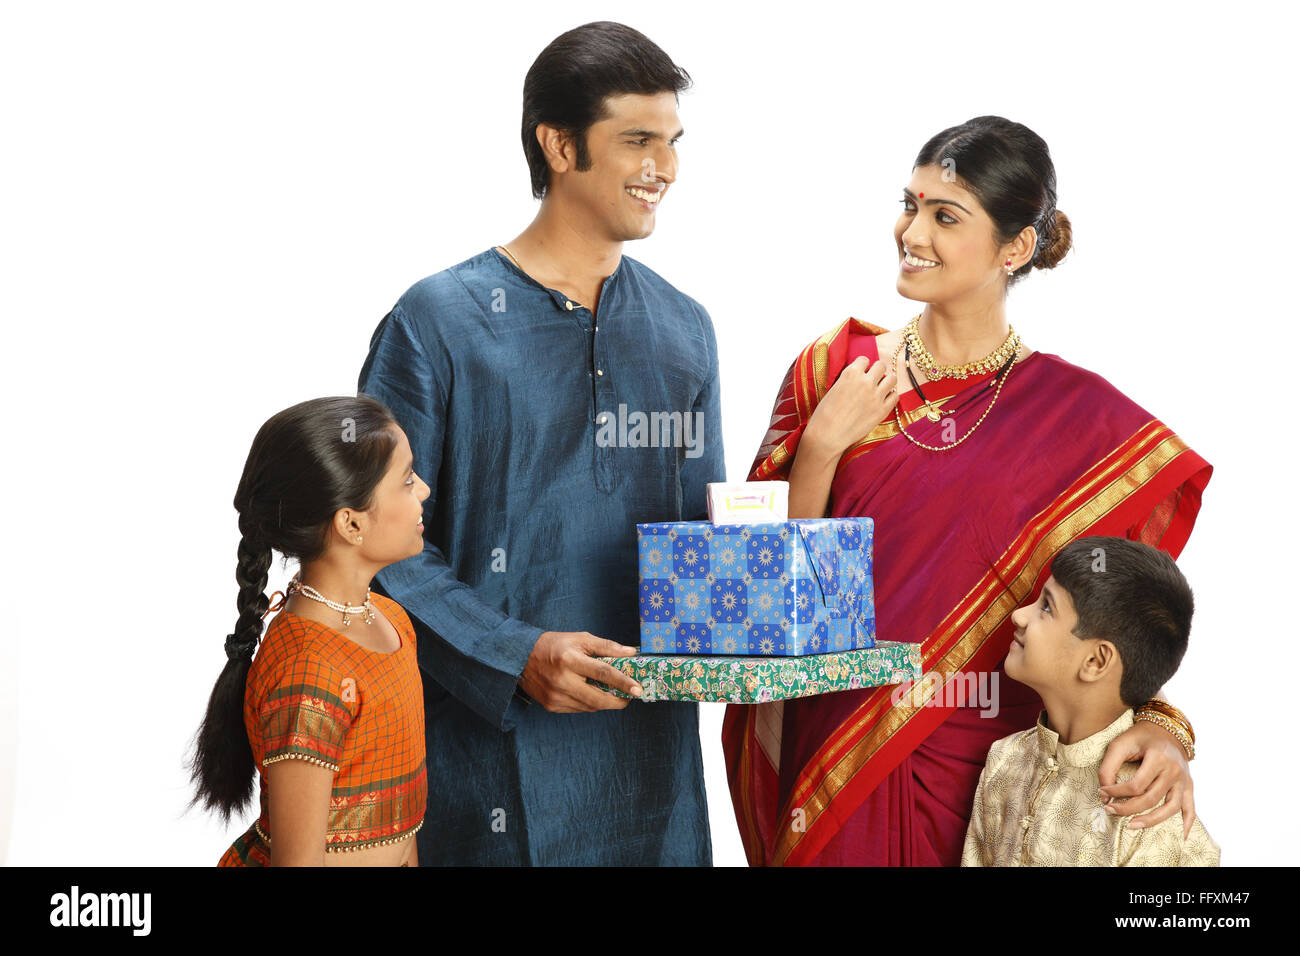 Rich rural farmer family with gift boxes MR#743A,743B,743C,743D Stock Photo